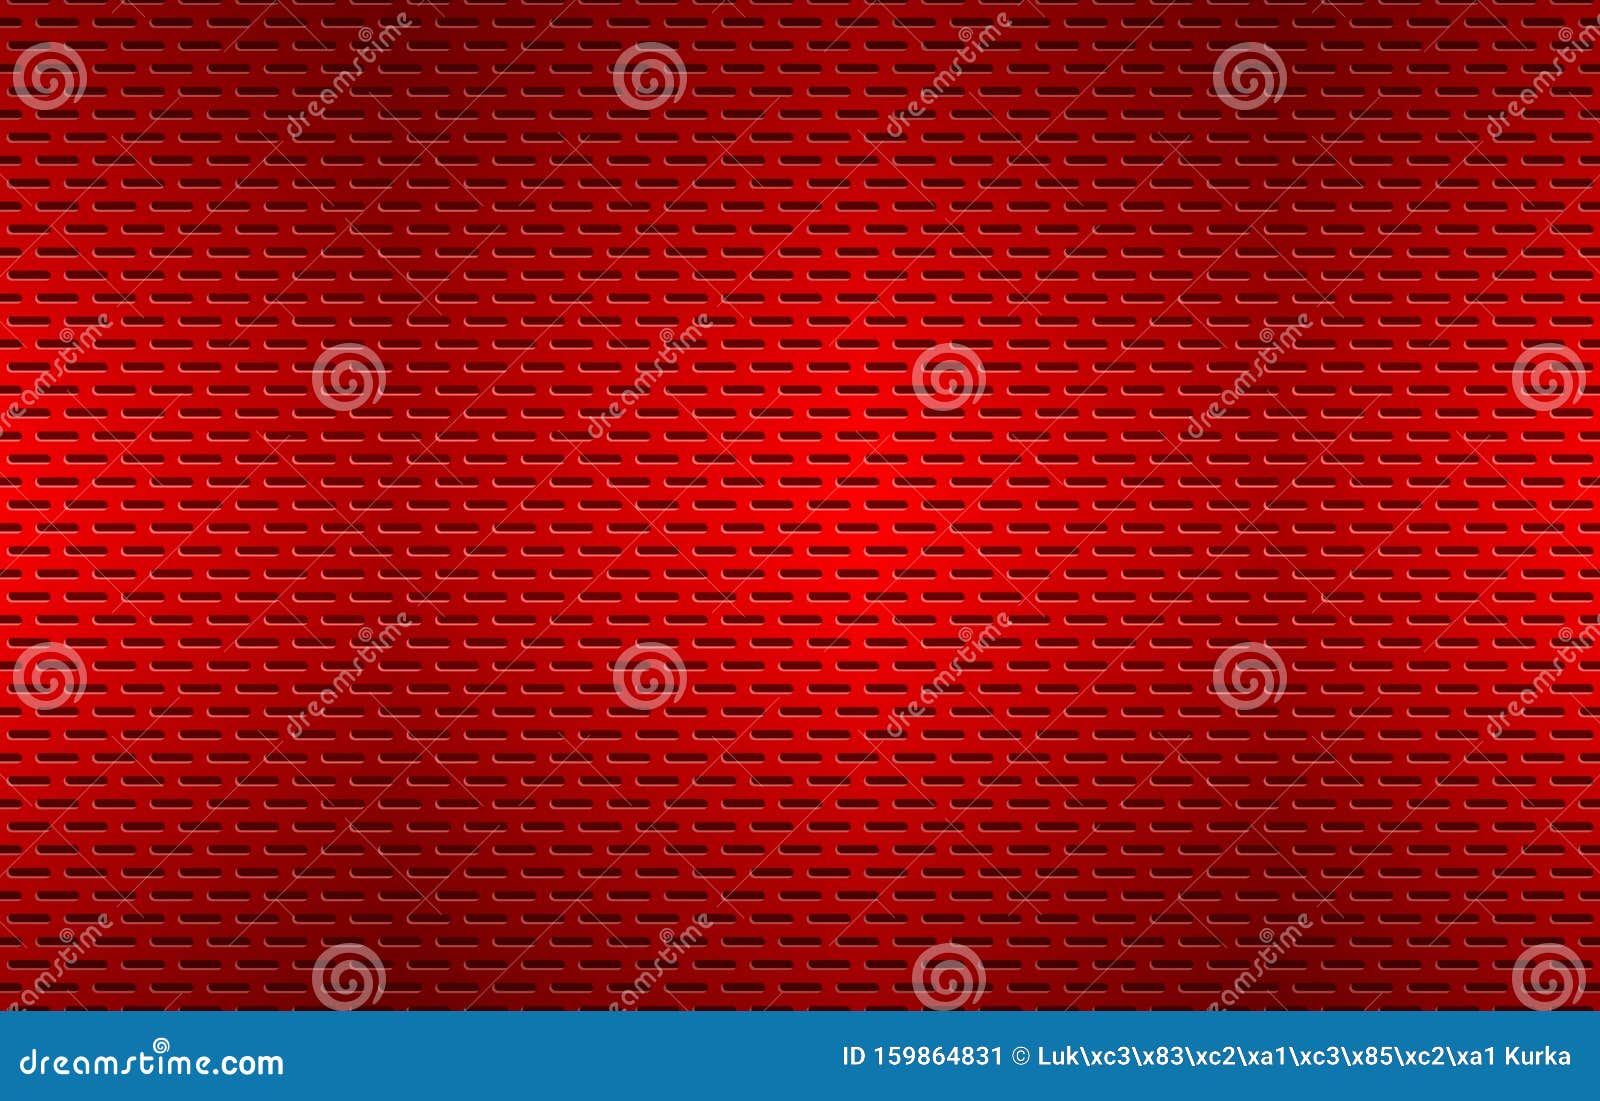 structured red perforated metal texture, aluminium grating, abstract metallic background